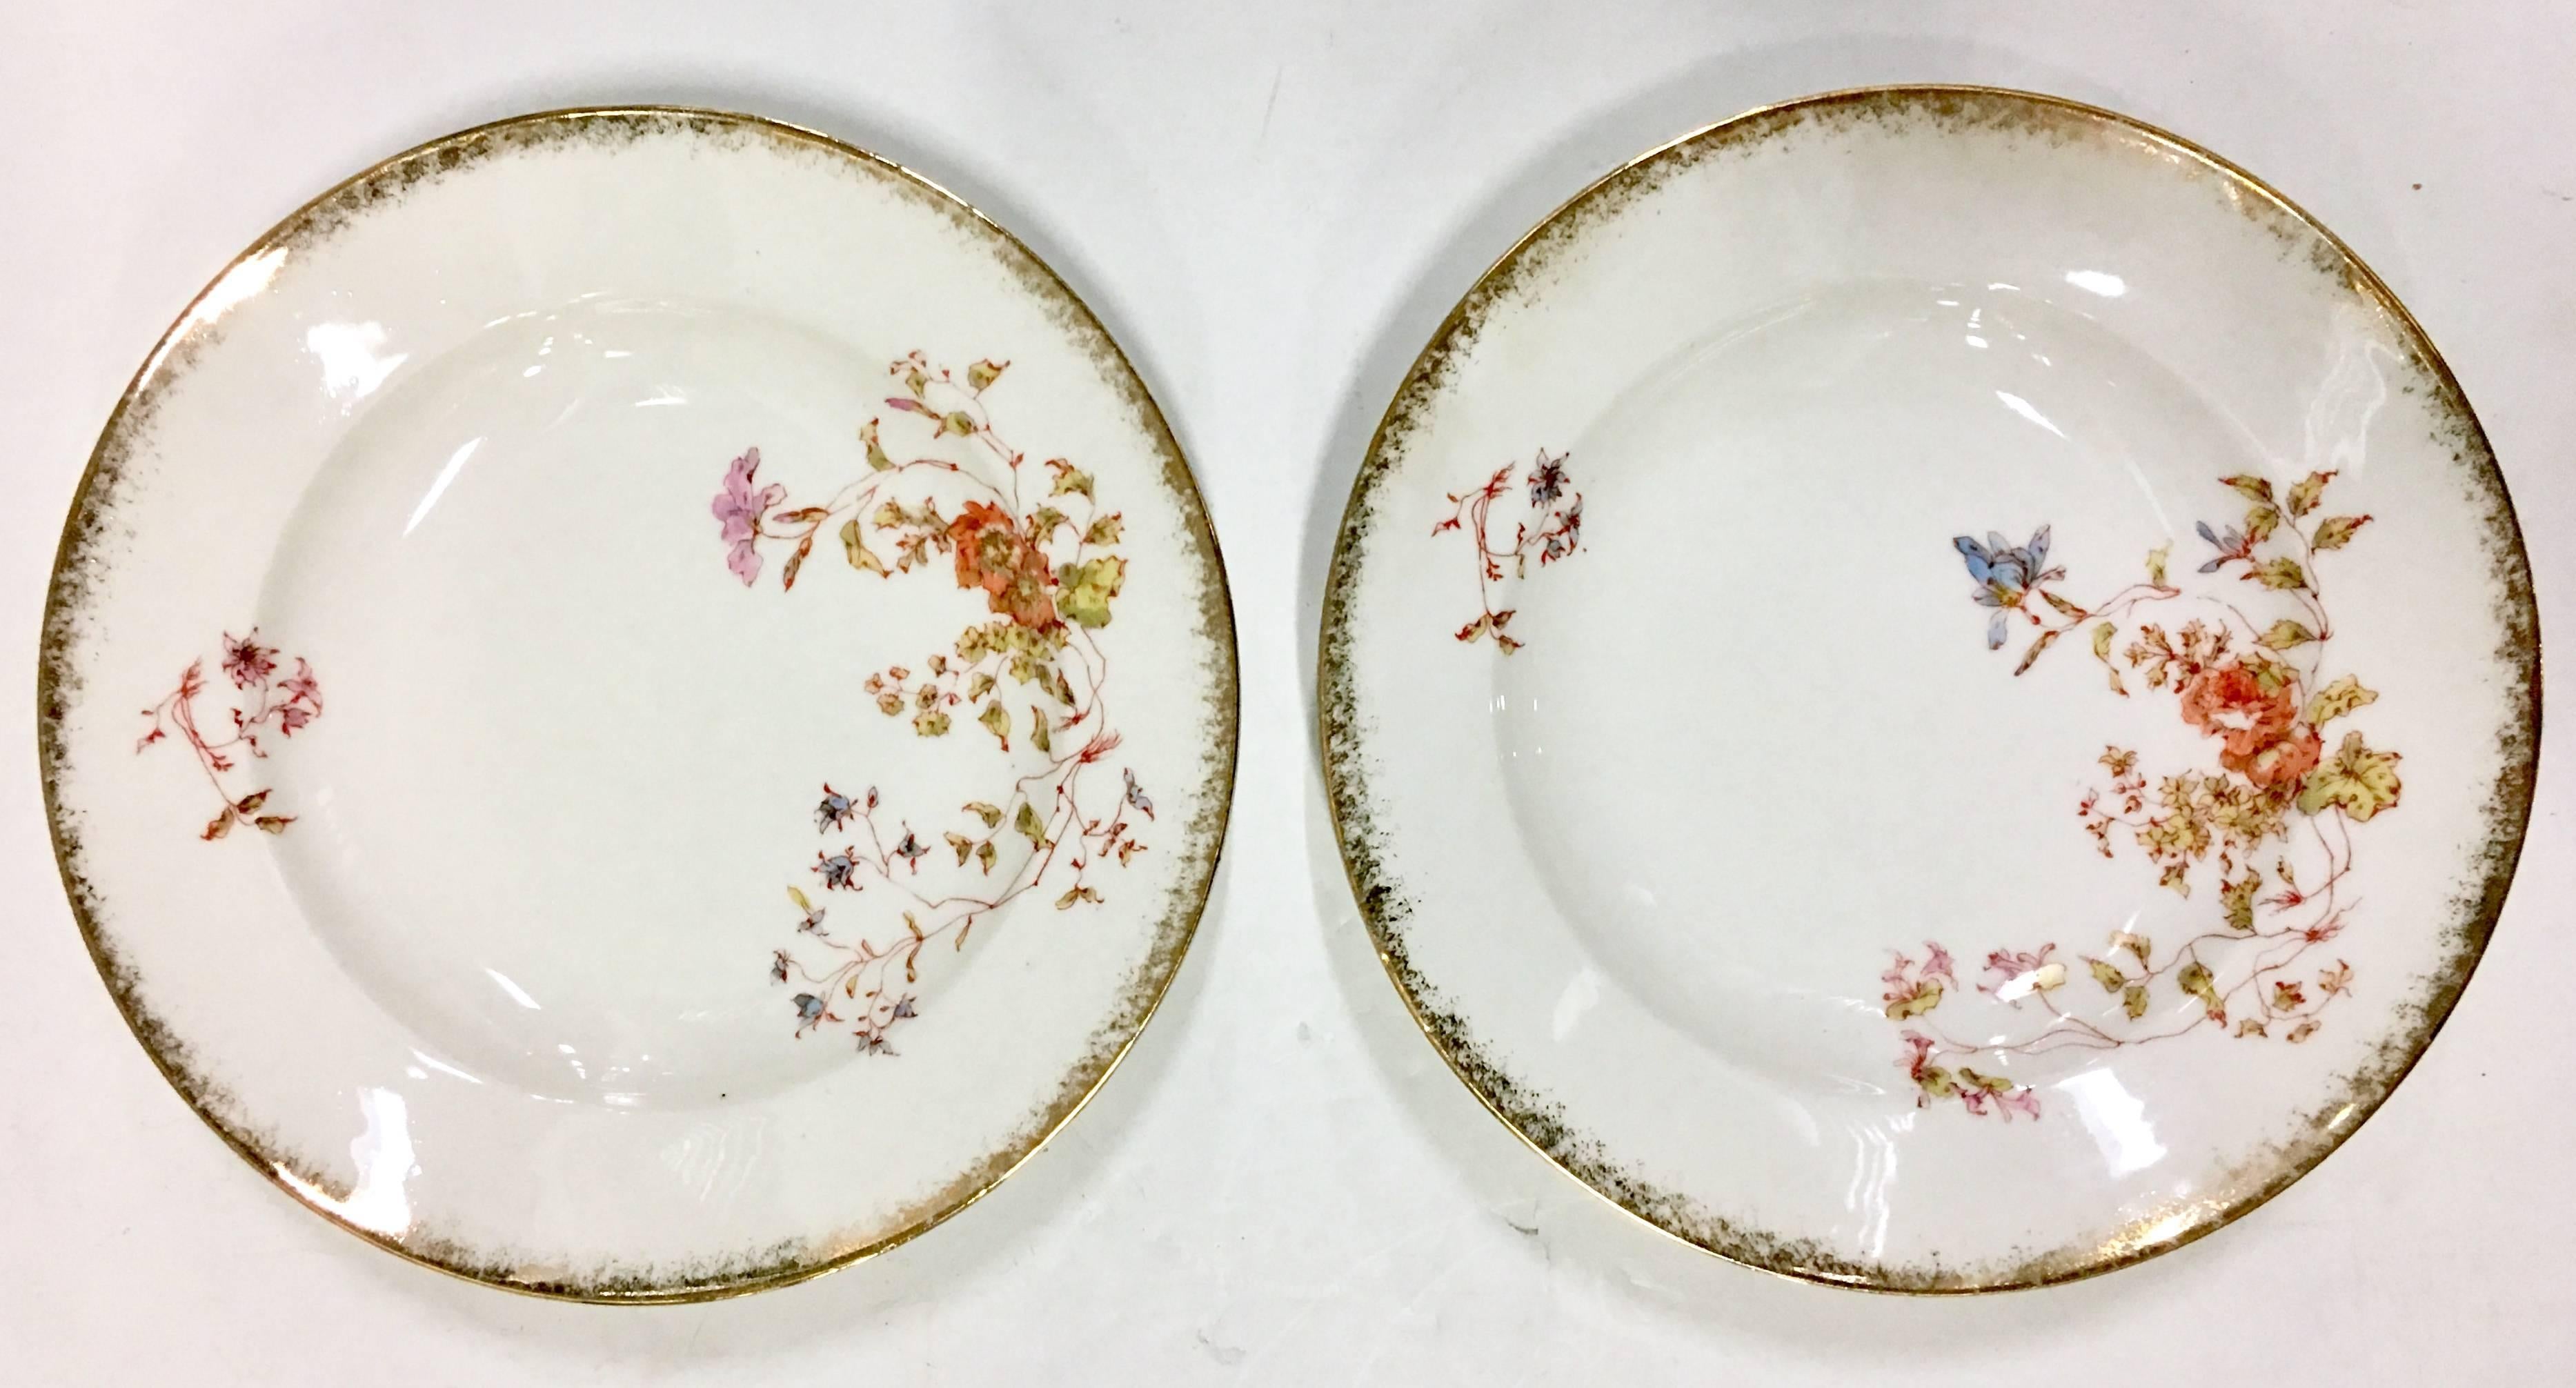 Antique set of ten Limoge France hand-painted rim soup bowls by, Oscar Gutherz-Limoges France. Pattern features a white ground and brushed gold dust 22-karat gold scallop edge rim with a pink, orange and green floral vine pattern. Each piece is one